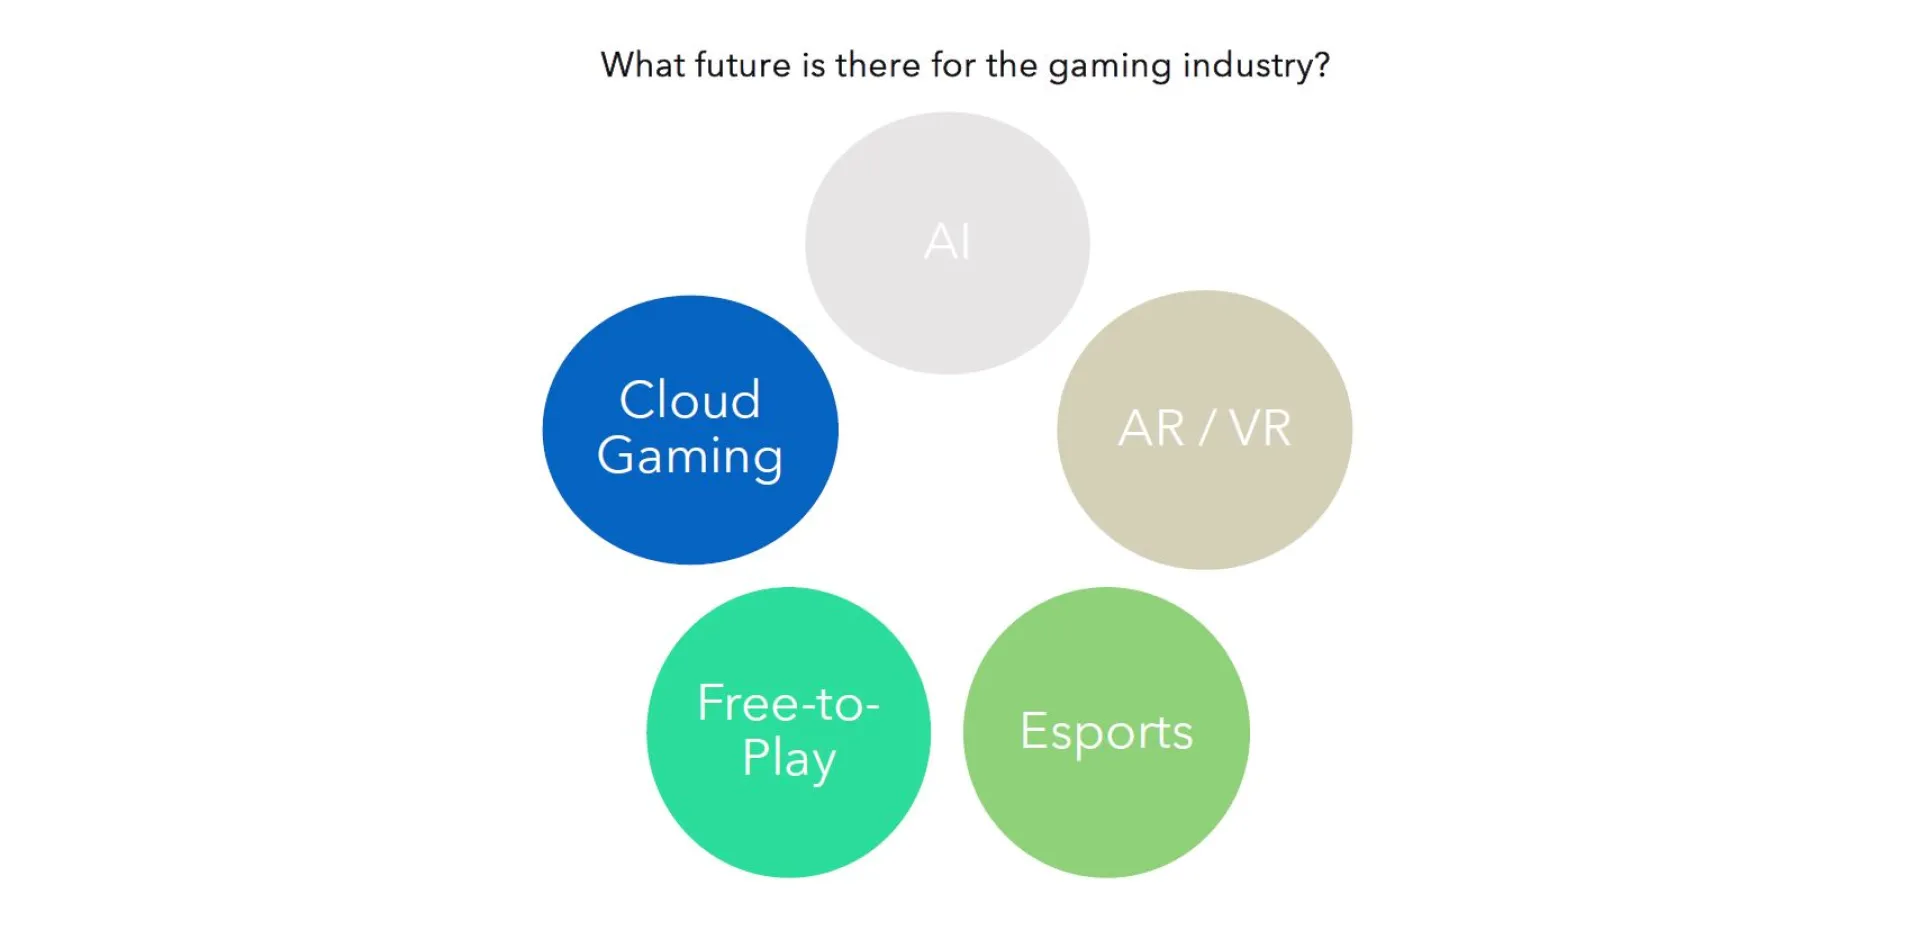 What future is there for the gaming industry